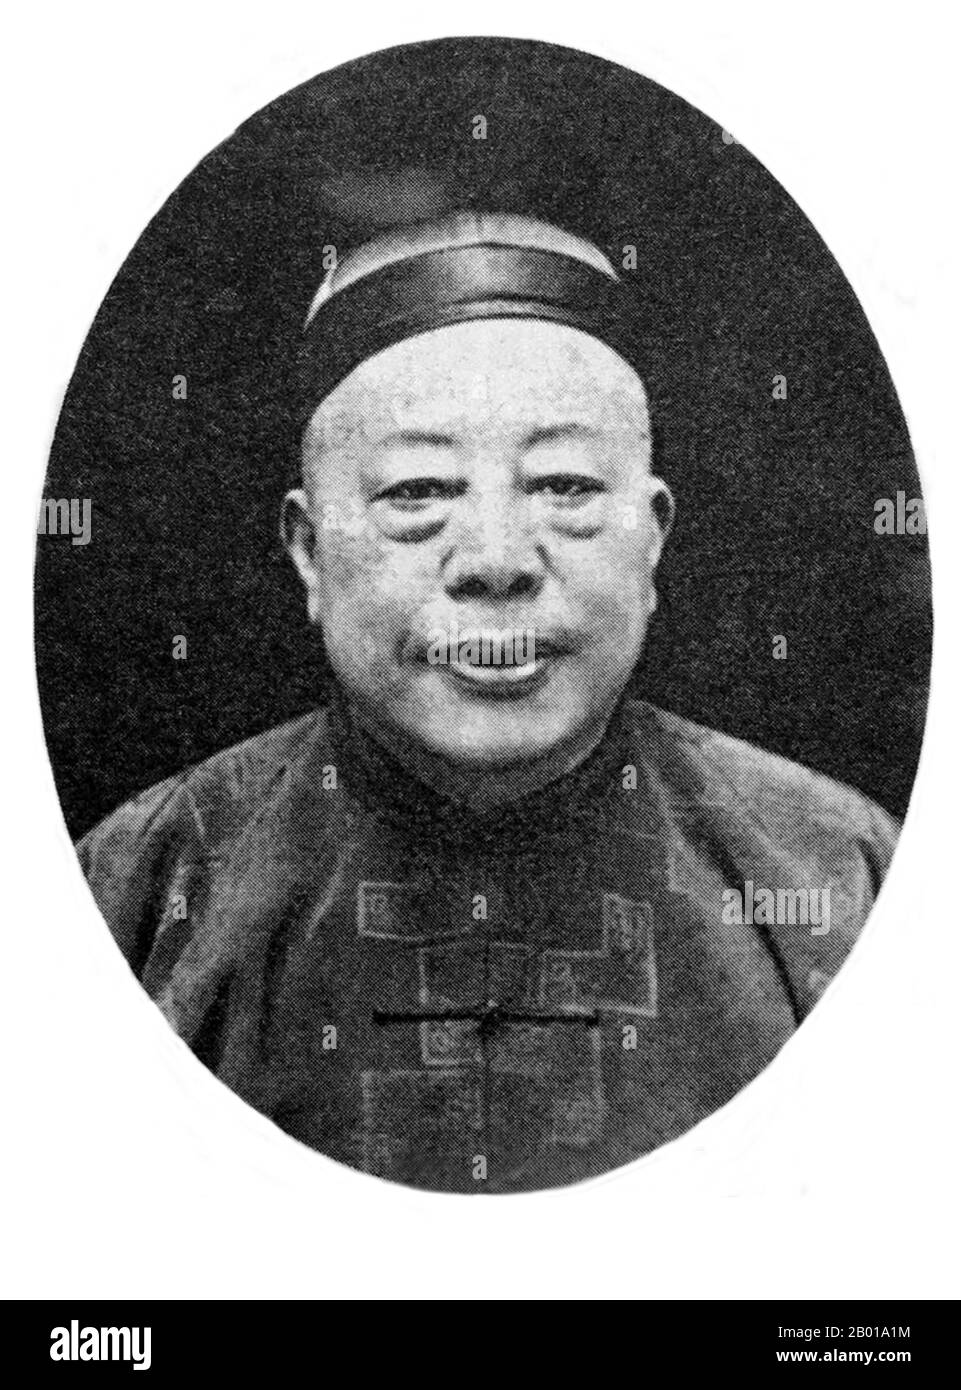 China: Huang Jingrong (10 May 1868 - 20 June 1953), French Concession detective and Shanghai mobster, c. 1940s.  Born in Suzhou, Huang's father was a constable in Suzhou before the family migrated to Shanghai to open a teahouse. During his childhood, Huang contracted a bad case of smallpox. While his subordinates called him 'Grand Master Huang', behind his back everyone called him 'Pockmarked Huang'.  Huang went to work at his father’s teahouse, which was not very far from the Zhengjia Bridge near the French Concession, an area rife with crooks, many of whom Huang later organised into a gang. Stock Photo